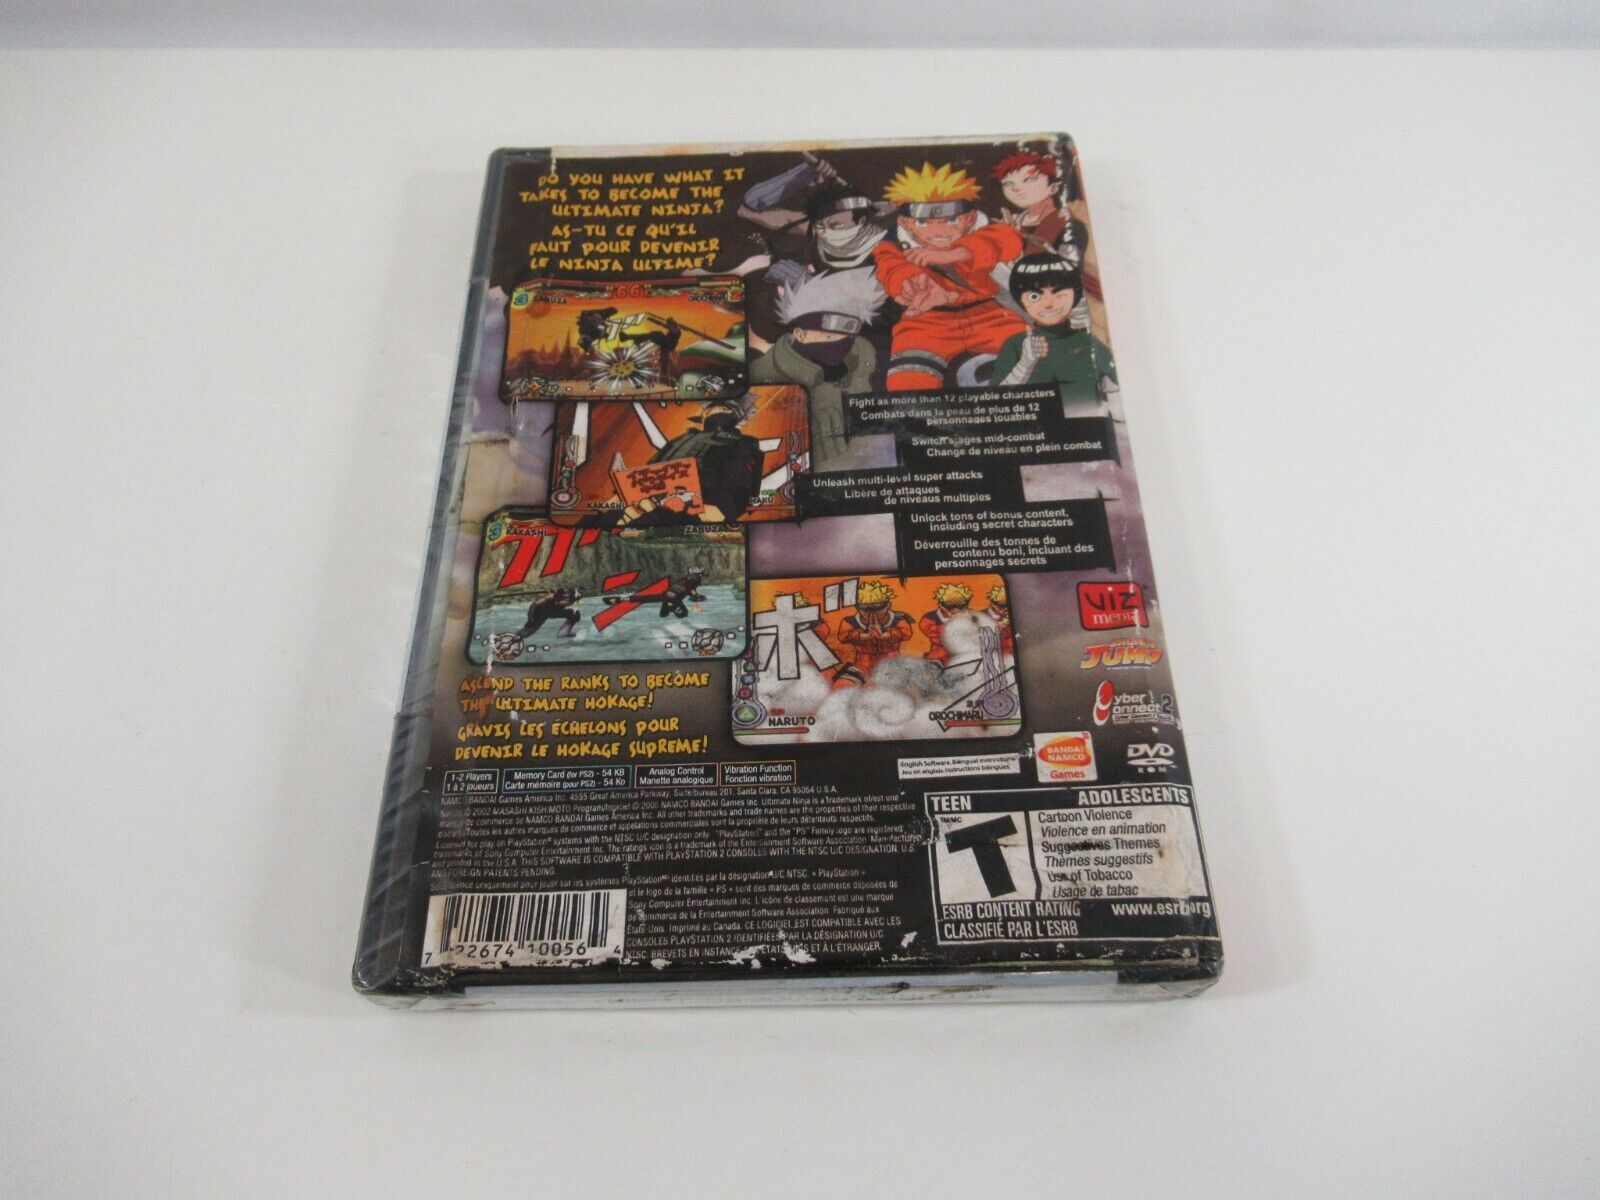 Primary image for Naruto: Ultimate Ninja (Sony PlayStation 2, 2006) PS2 Greatest Hits Sealed